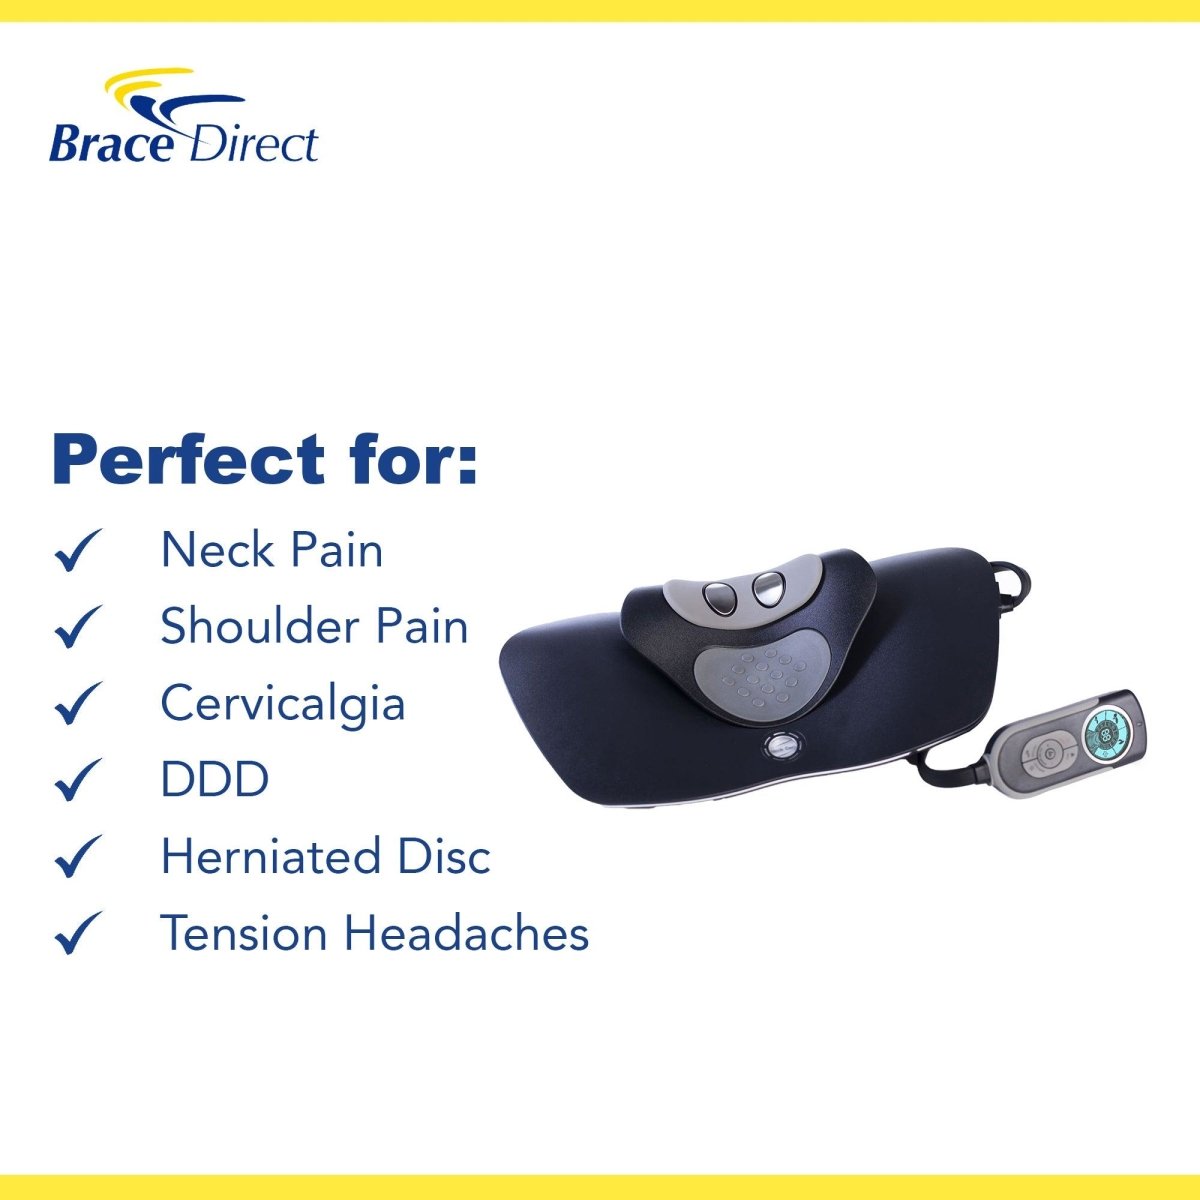 Brace Direct Digital Cervical Traction Unit with Massage, Heat and TENS Electrotherapy - CTU348 - Brace Direct